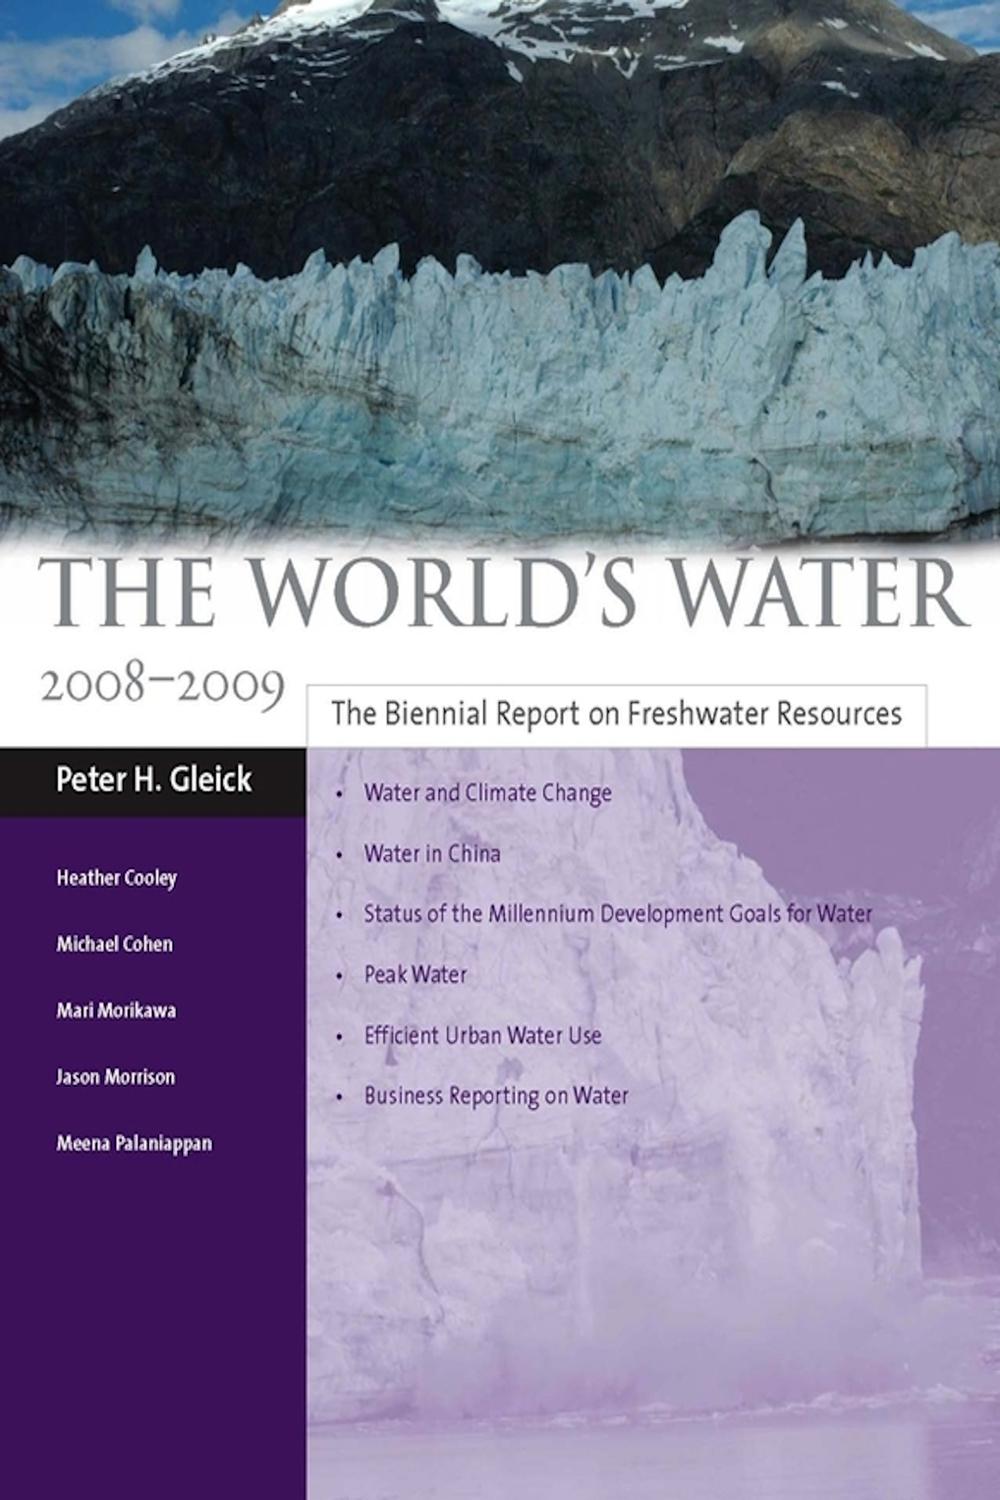 The World's Water 2008-2009 - Peter H. Gleick, Michael J. Cohen